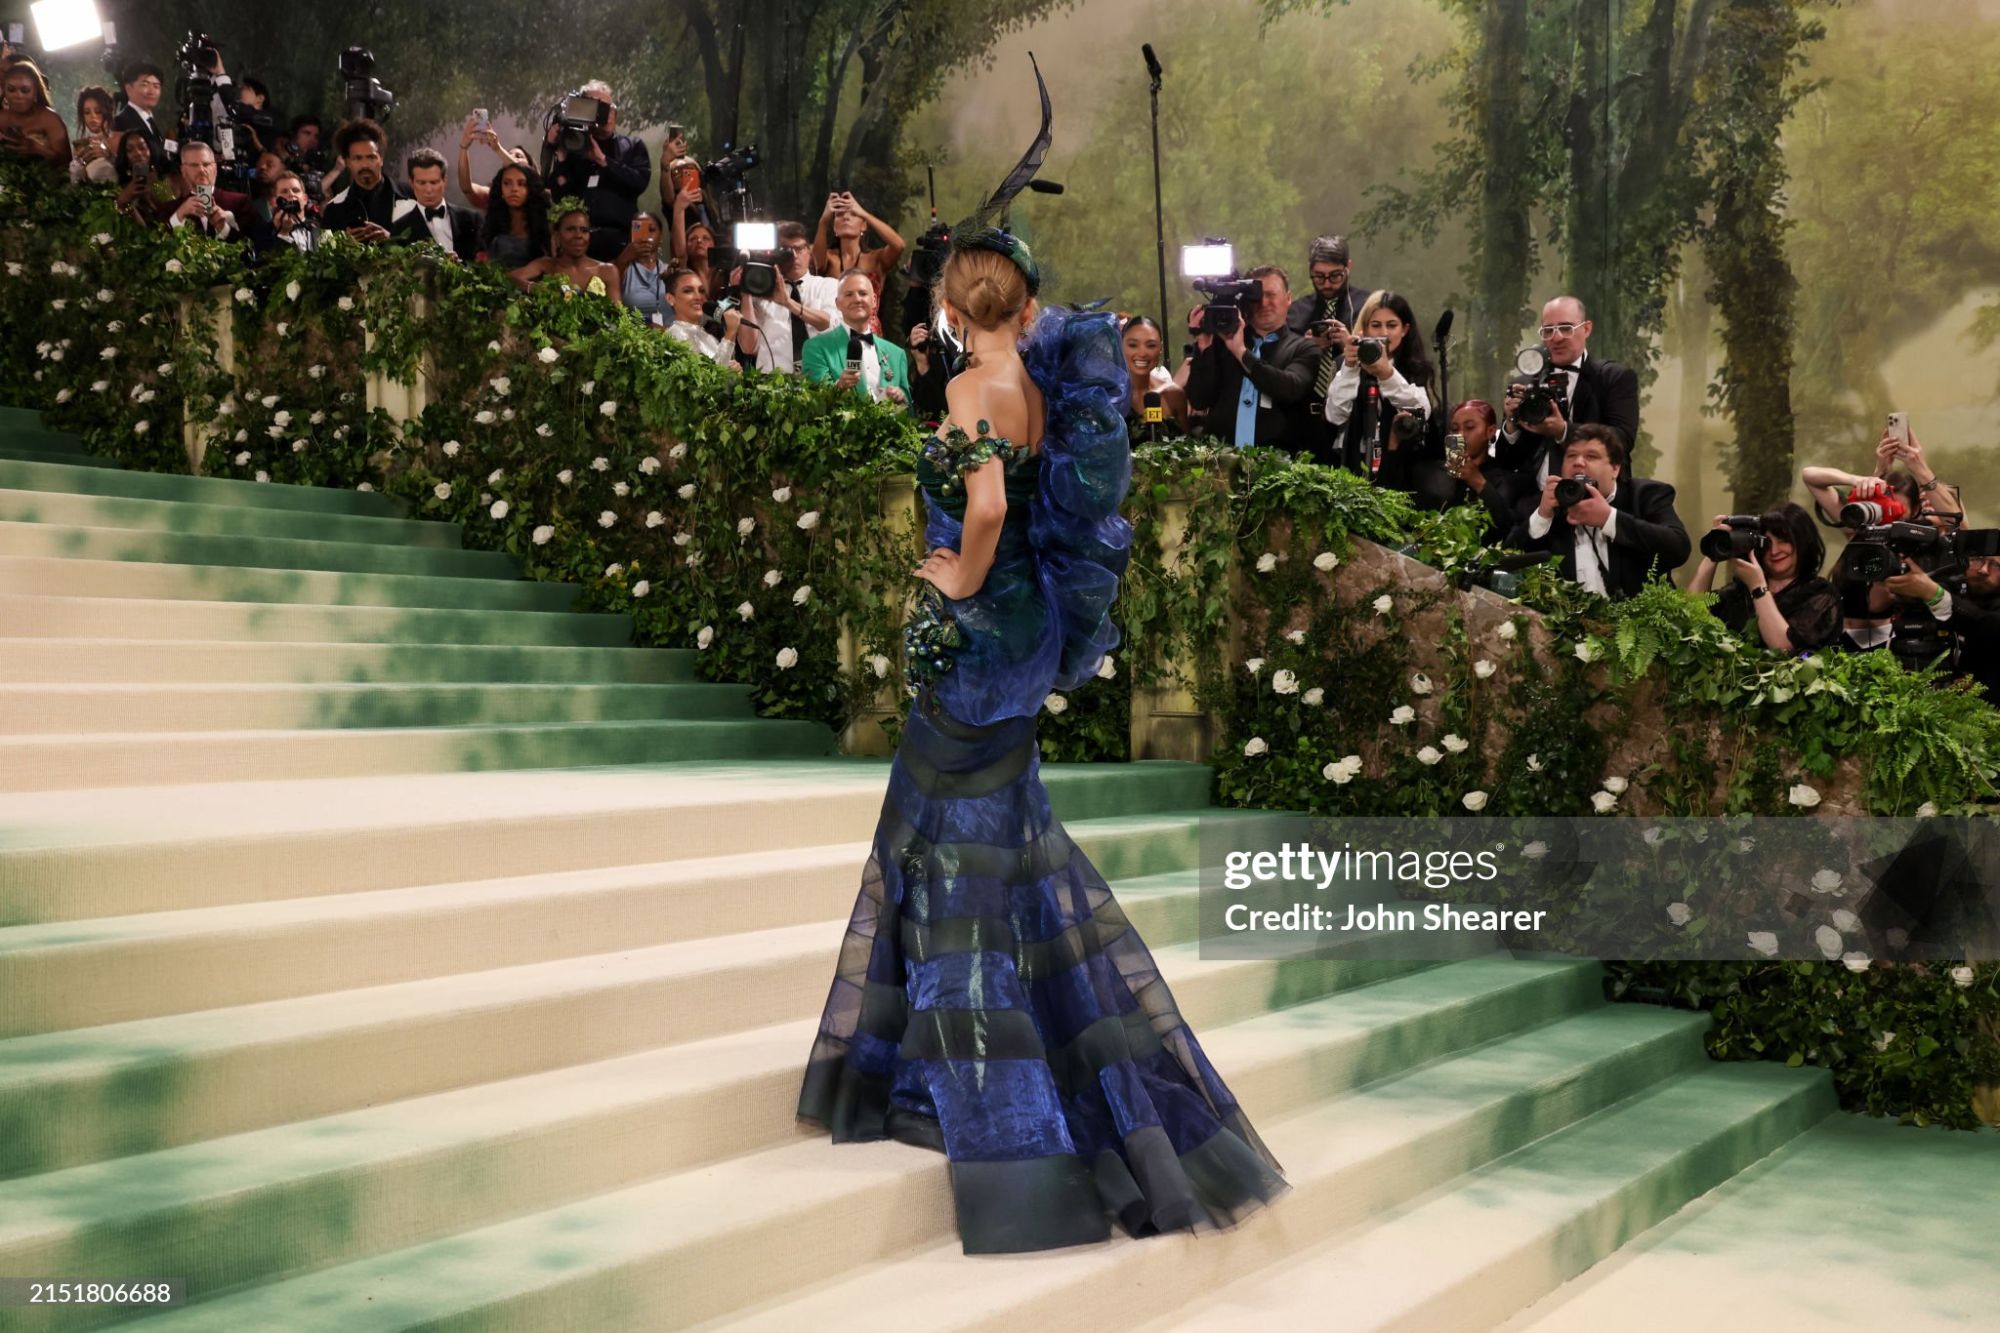 gettyimages-2151806688-2048x2048.jpg